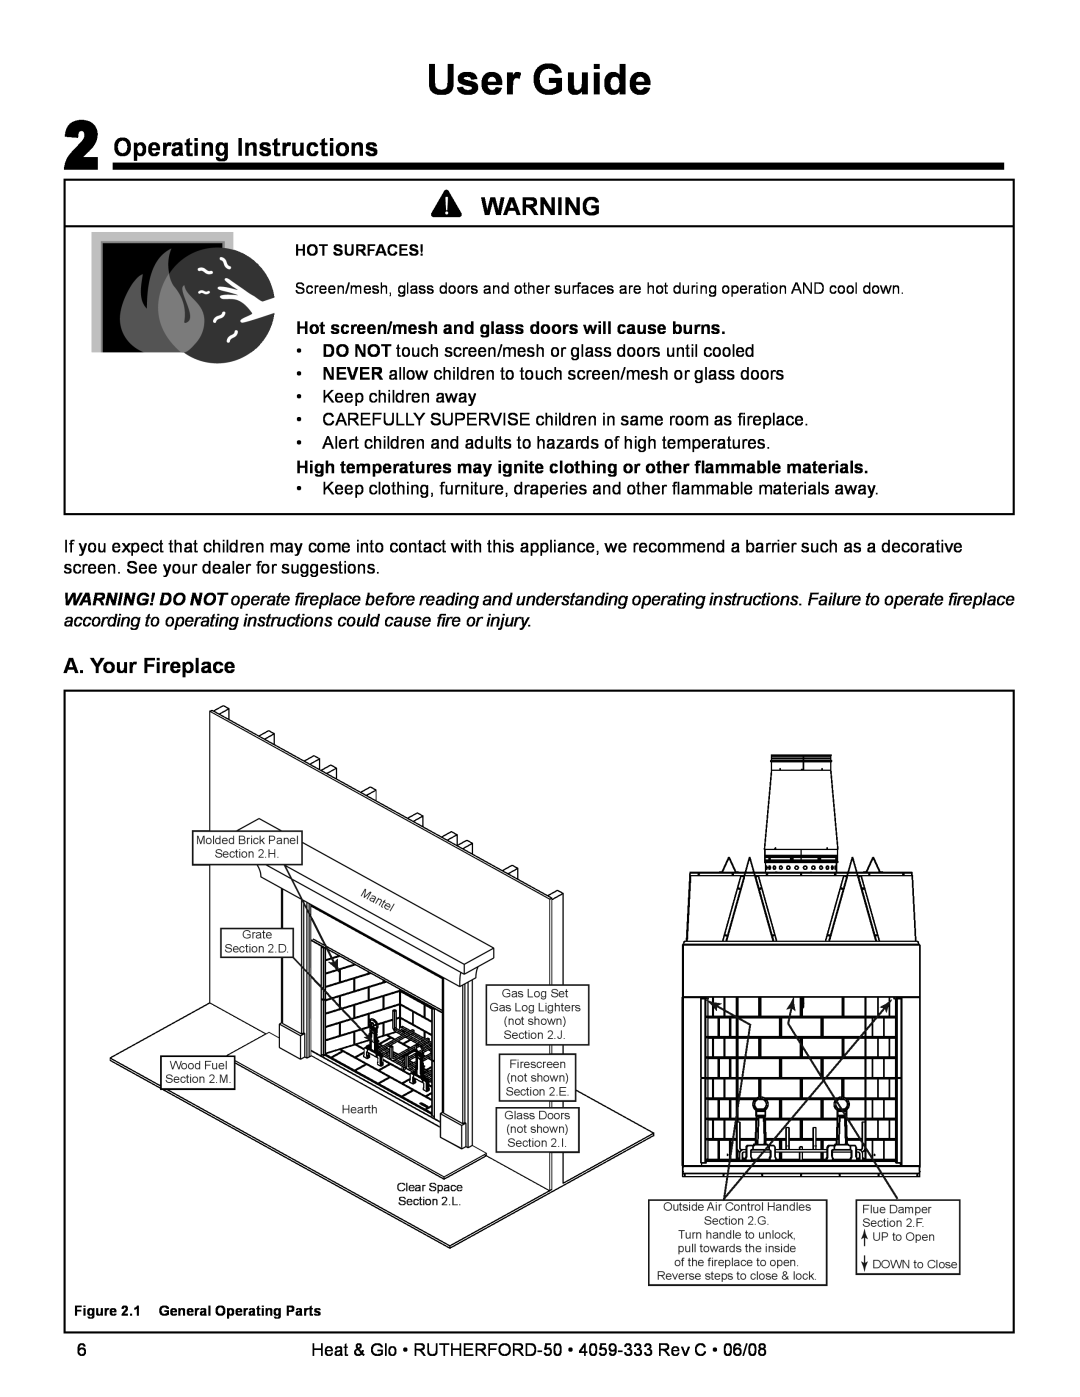 Heat & Glo LifeStyle 50 owner manual User Guide, Operating Instructions, A. Your Fireplace 